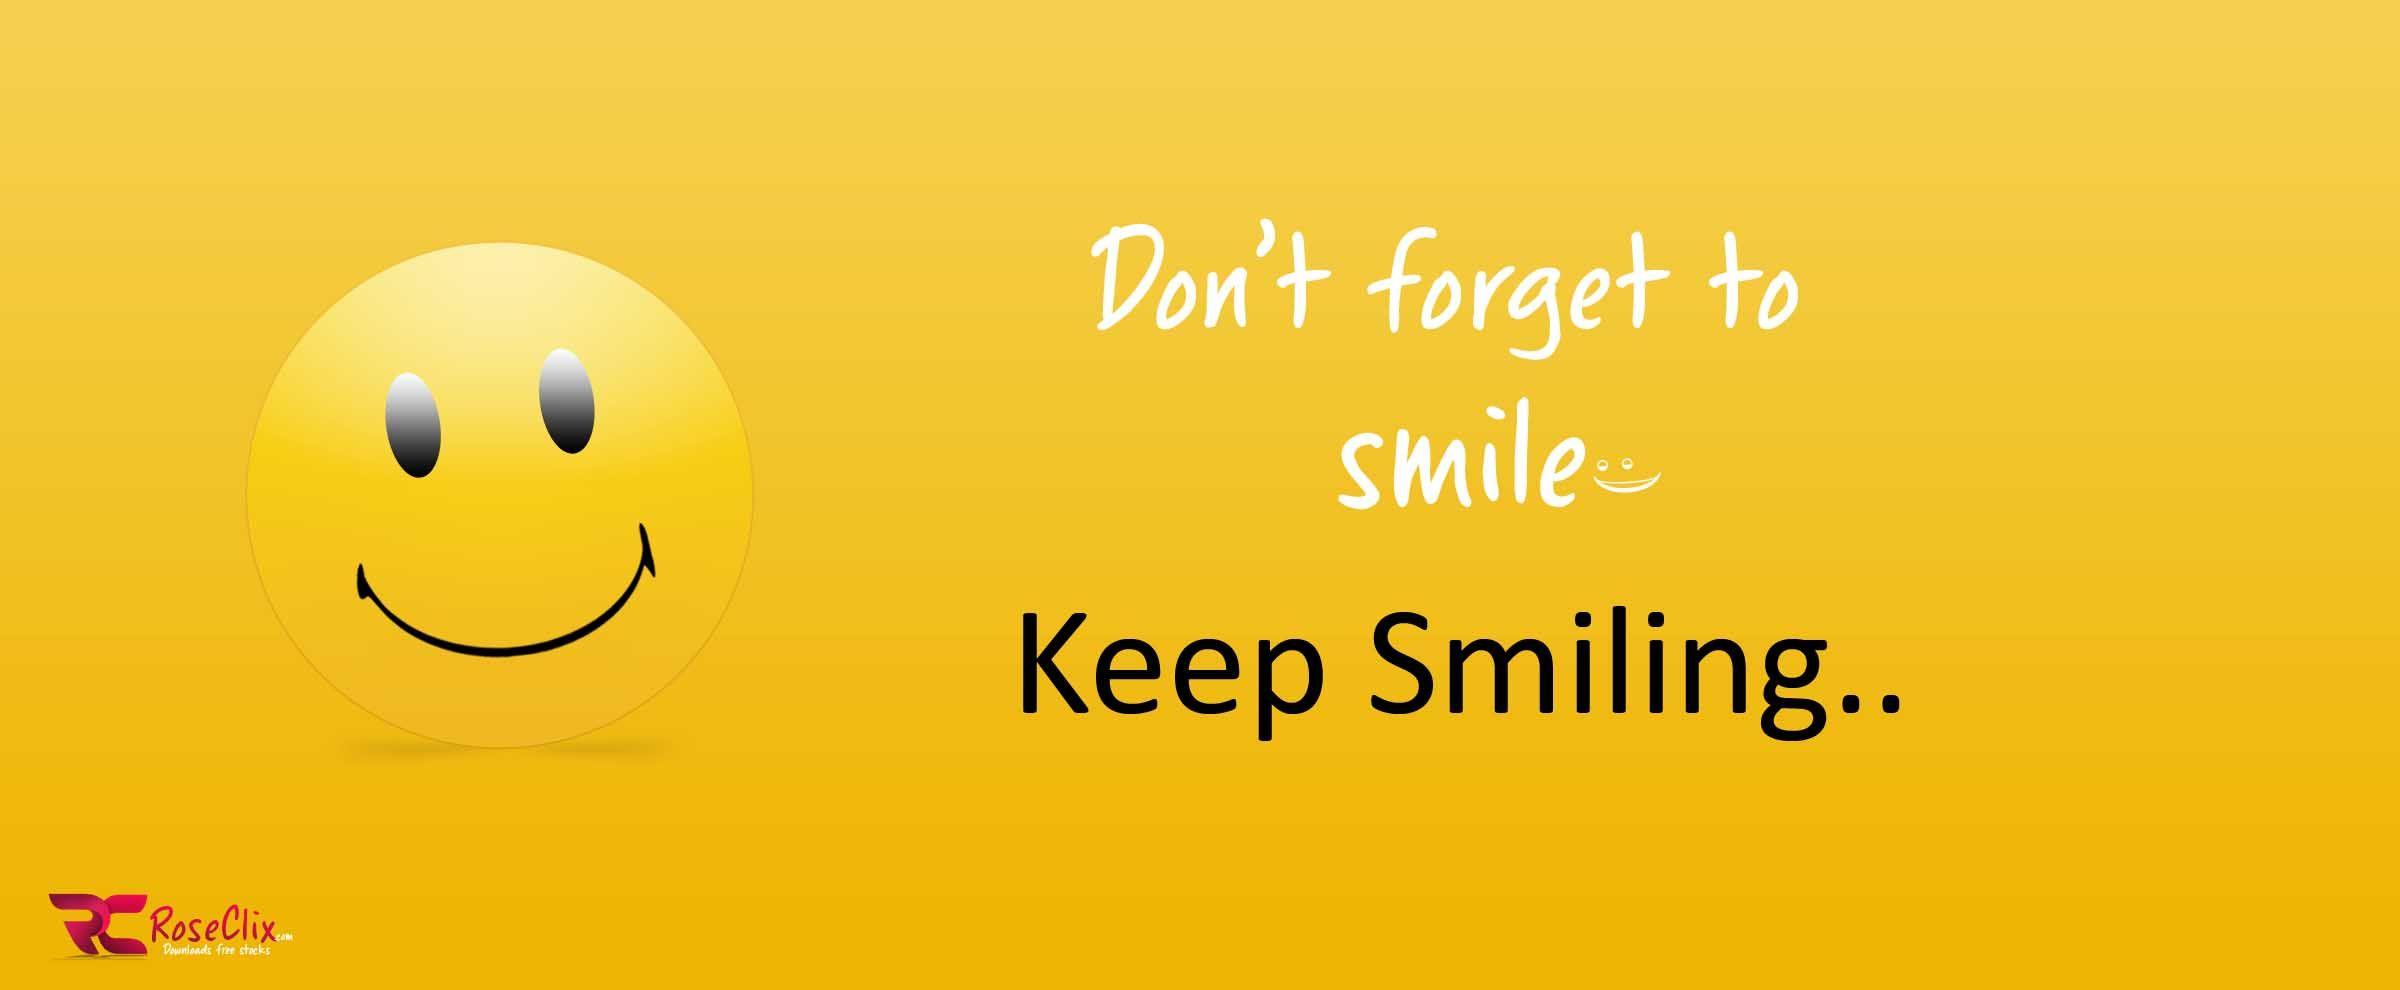 Keep Smiling Fb Cover dont forget to smile Fb Cover